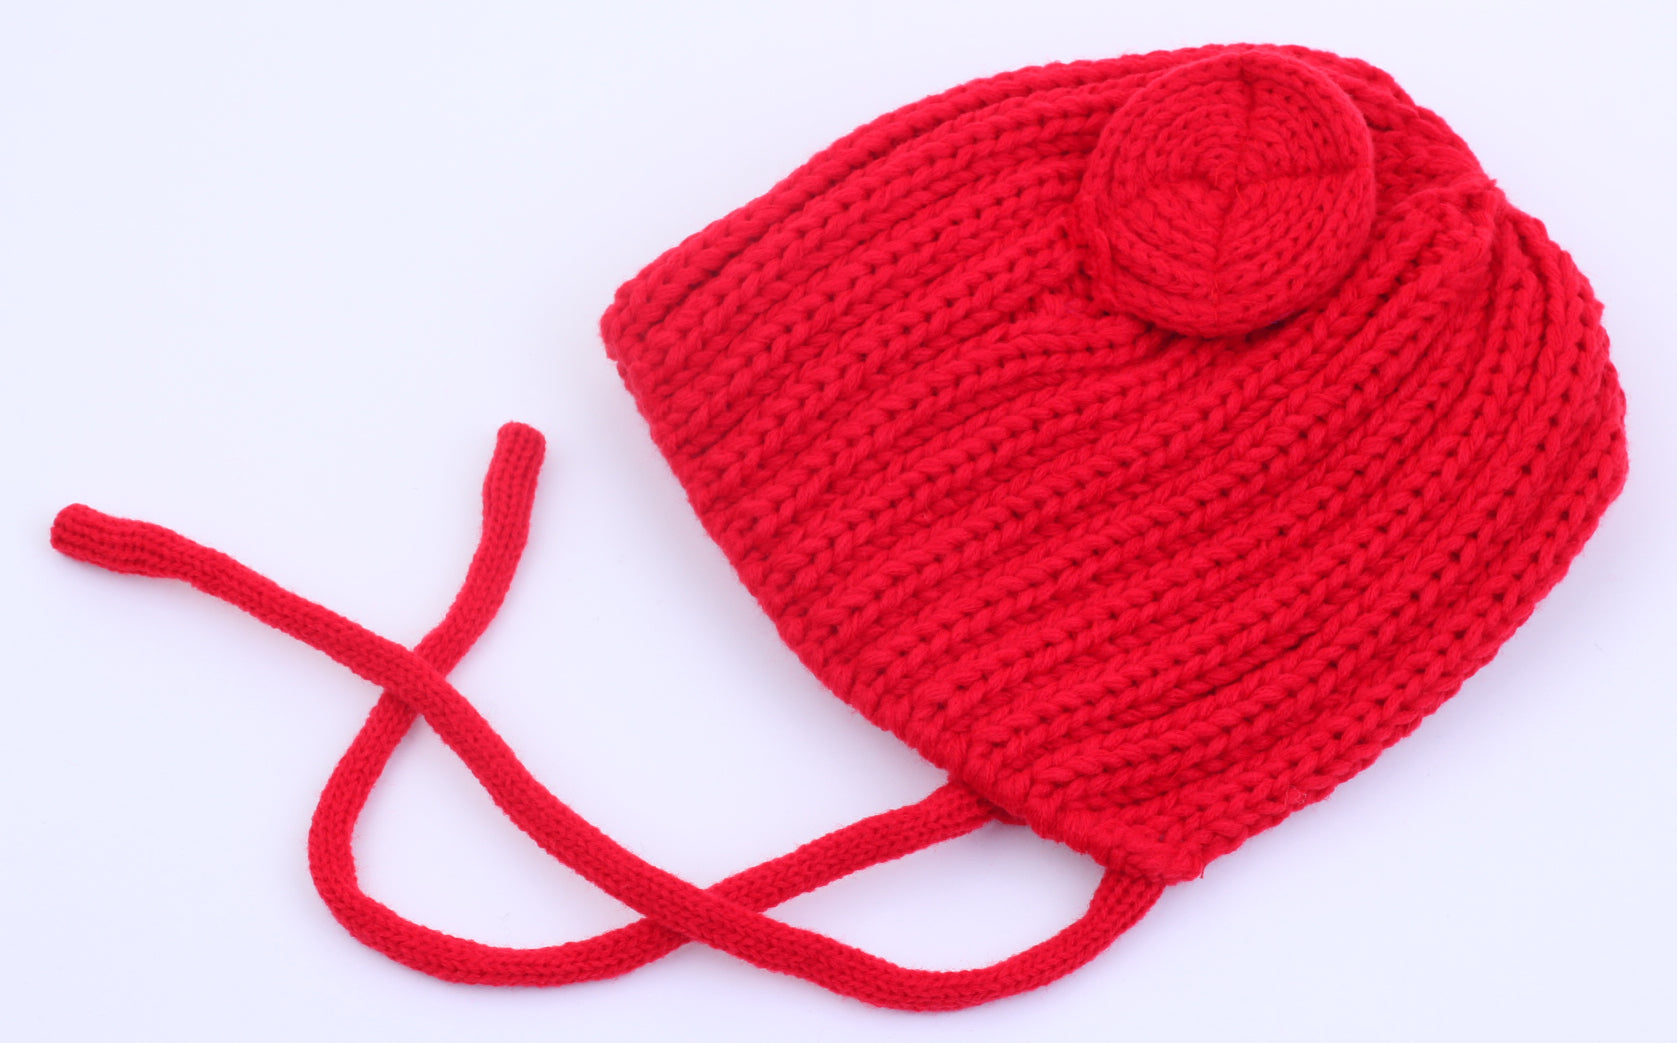 Red Cute Ears Sweater Knitted Hats Beanies